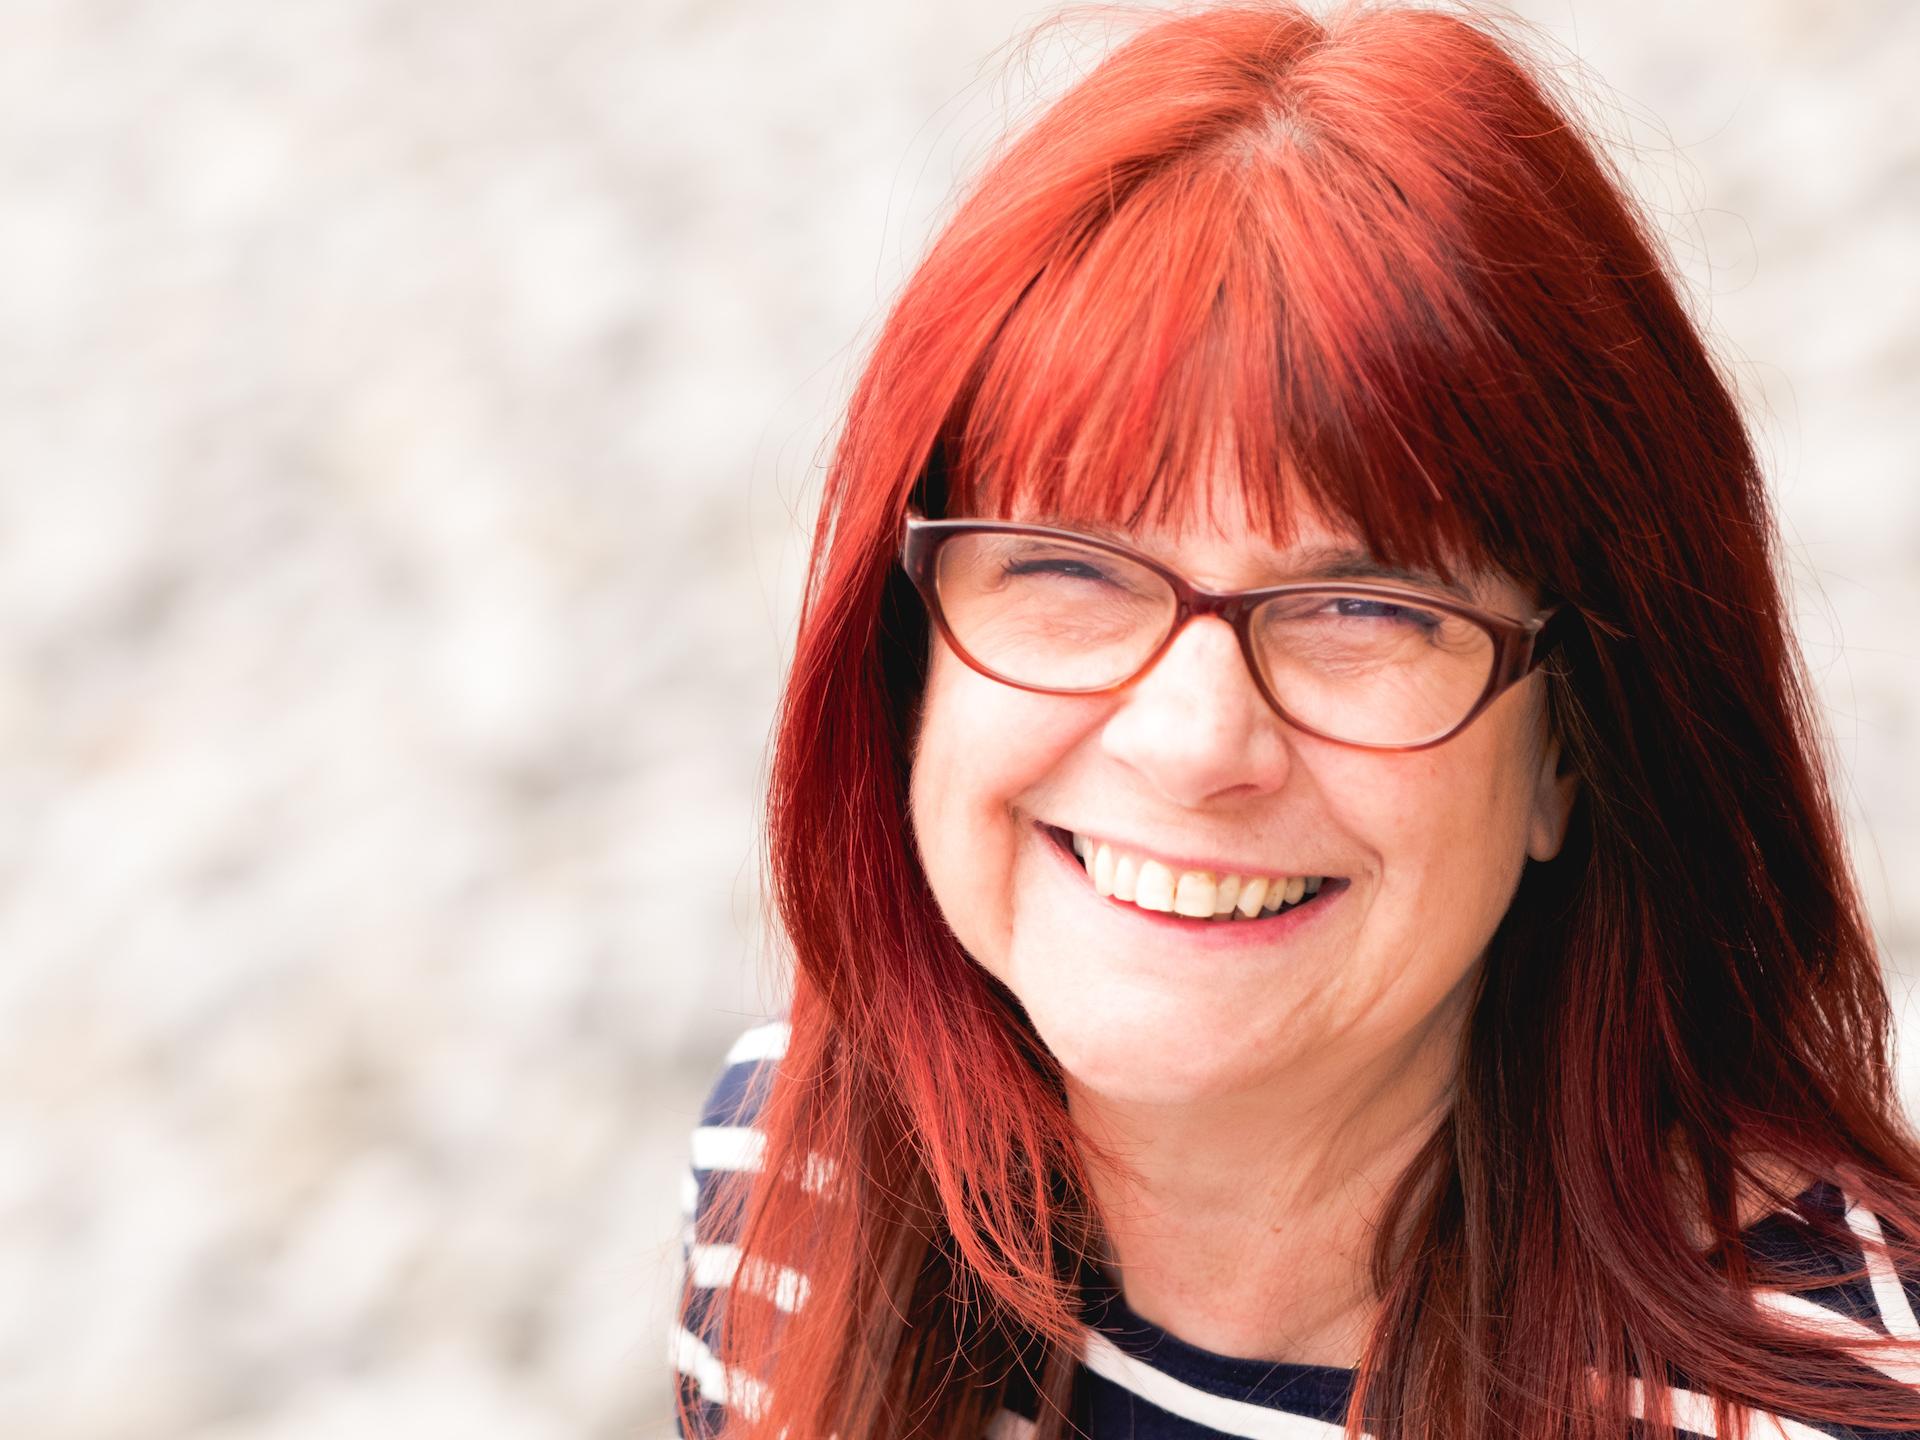 A woman with red hair and glasses wearing a black and white striped top smiling 